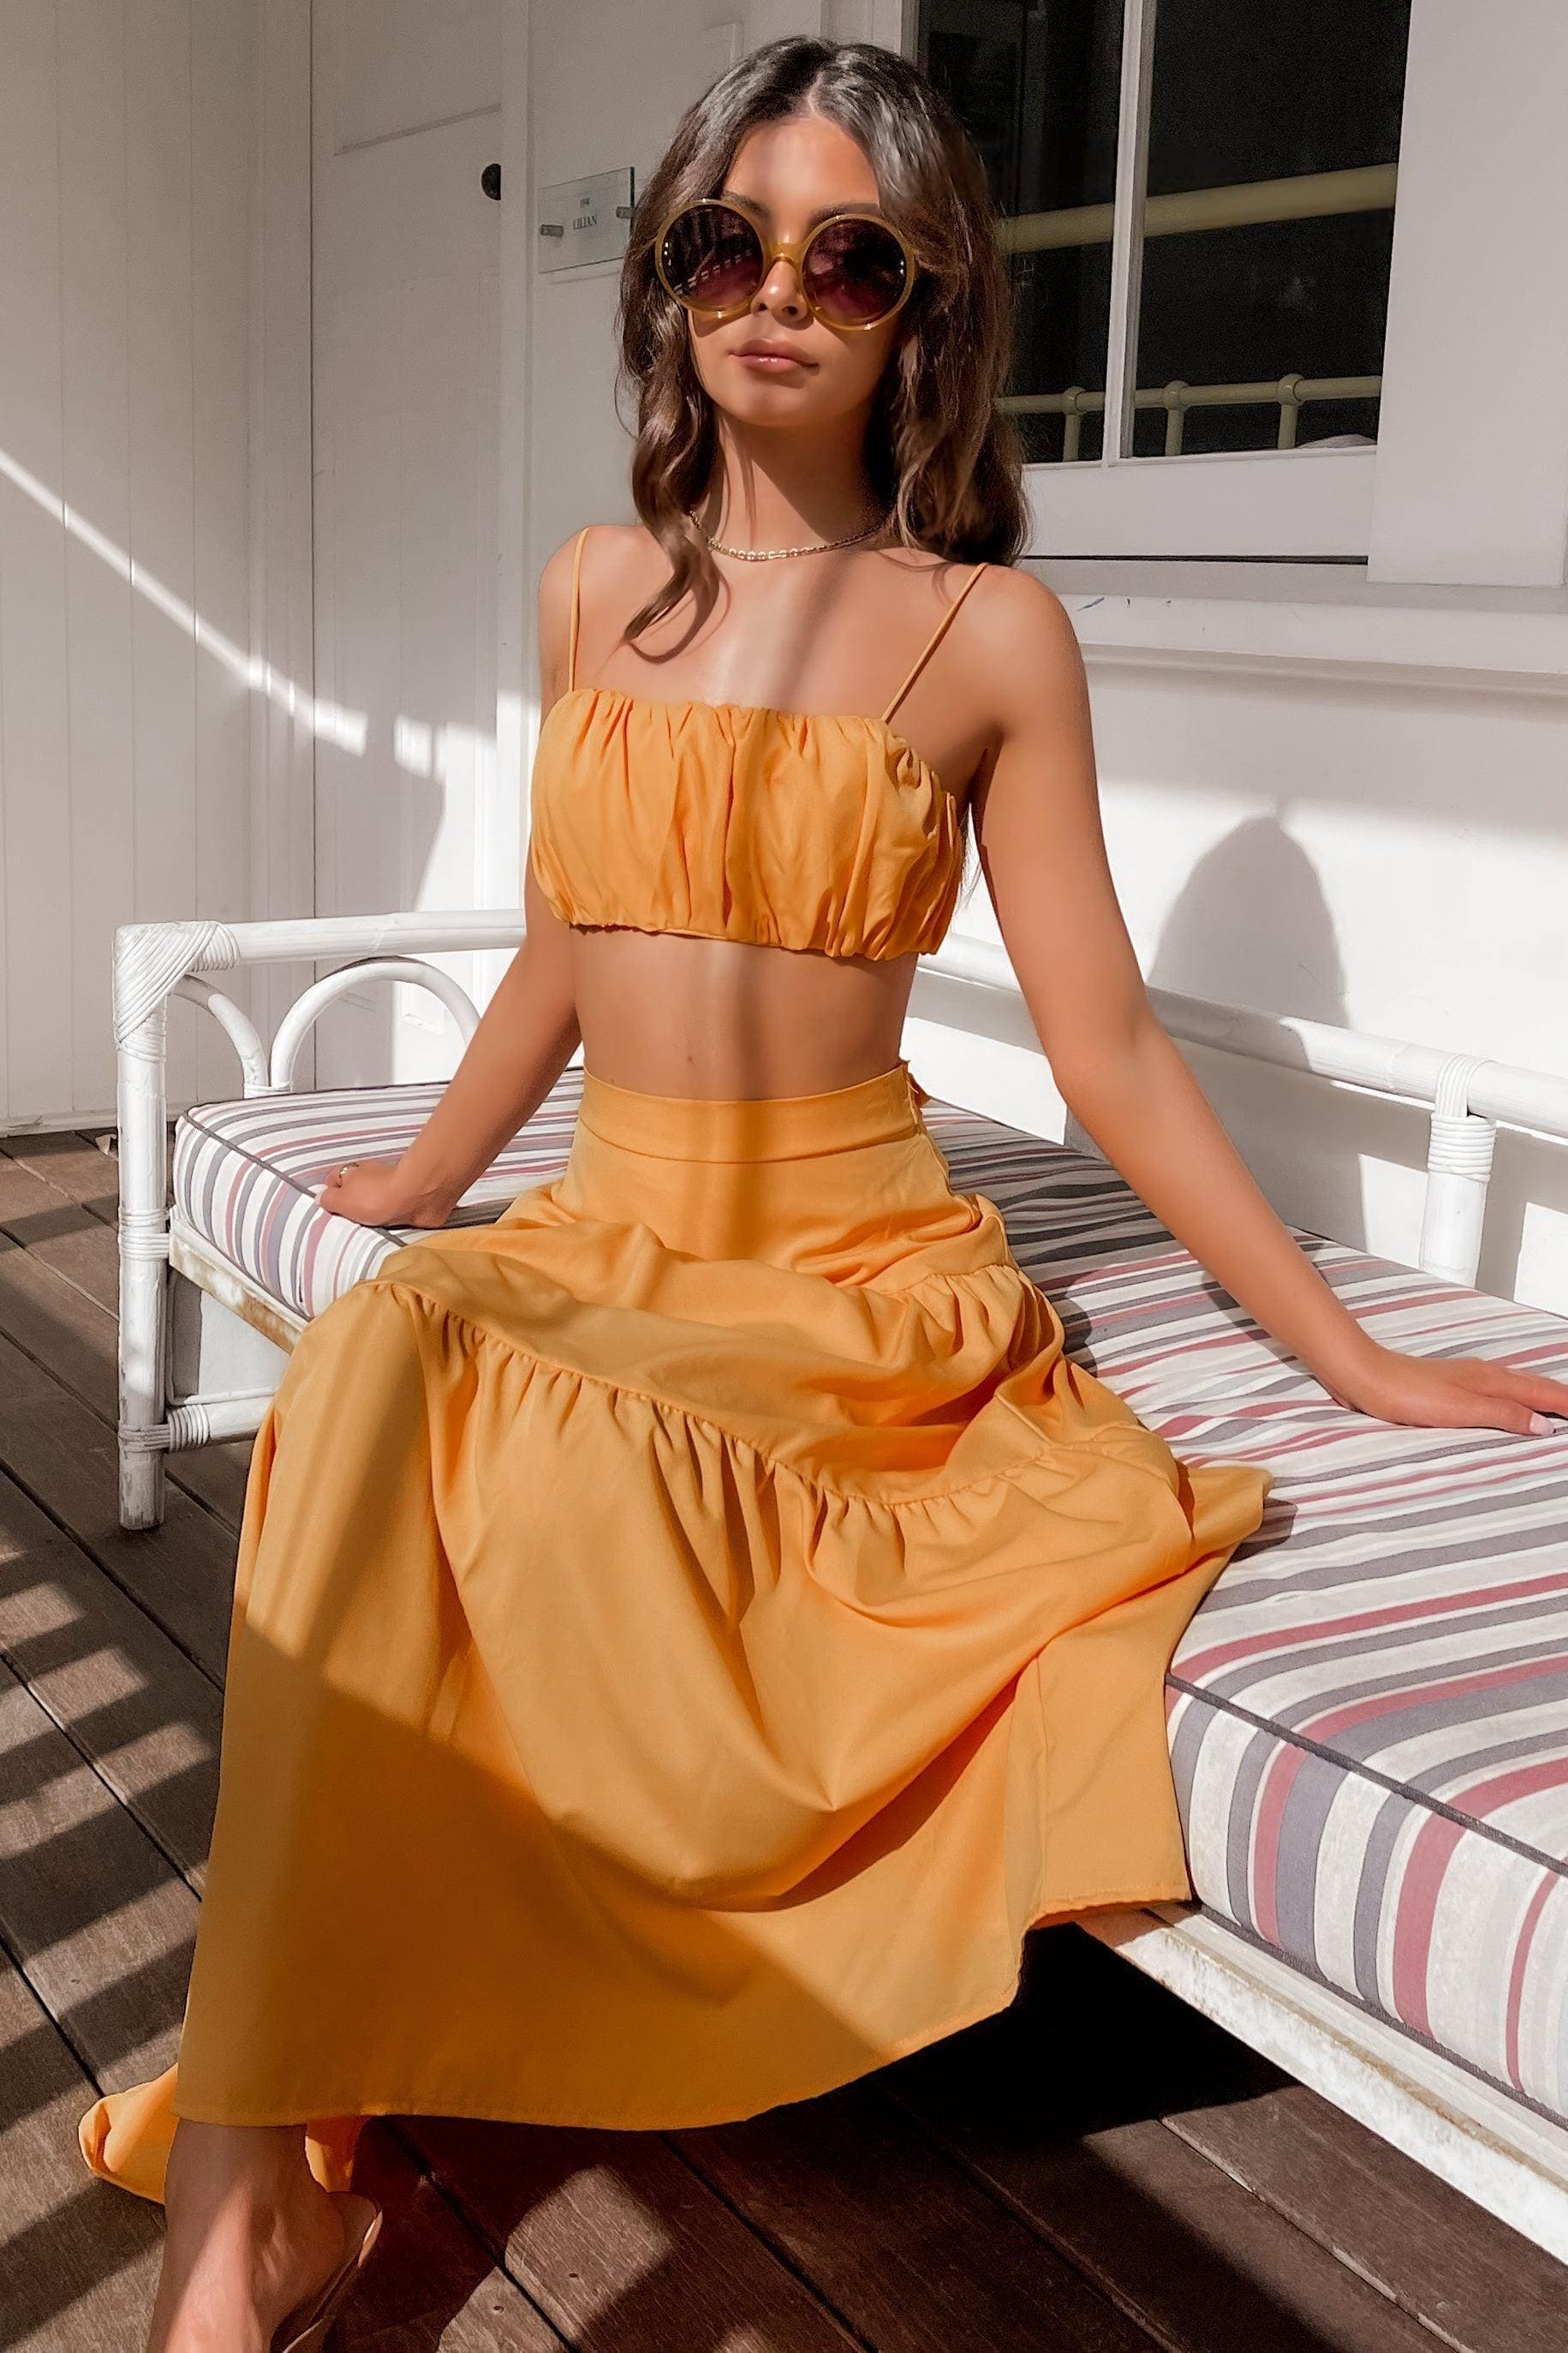 Tamasine Top, CROP TOPS, ORANGE, POLYESTER, Sale, TOP, TOPS, Our New Tamasine Top Is Now Only $46.00 Exclusive At Mishkah, Our New Tamasine Top is now only $46.00-We Have The Latest Women's Tops @ Mishkah Online Fashion Boutique-MISHKAH